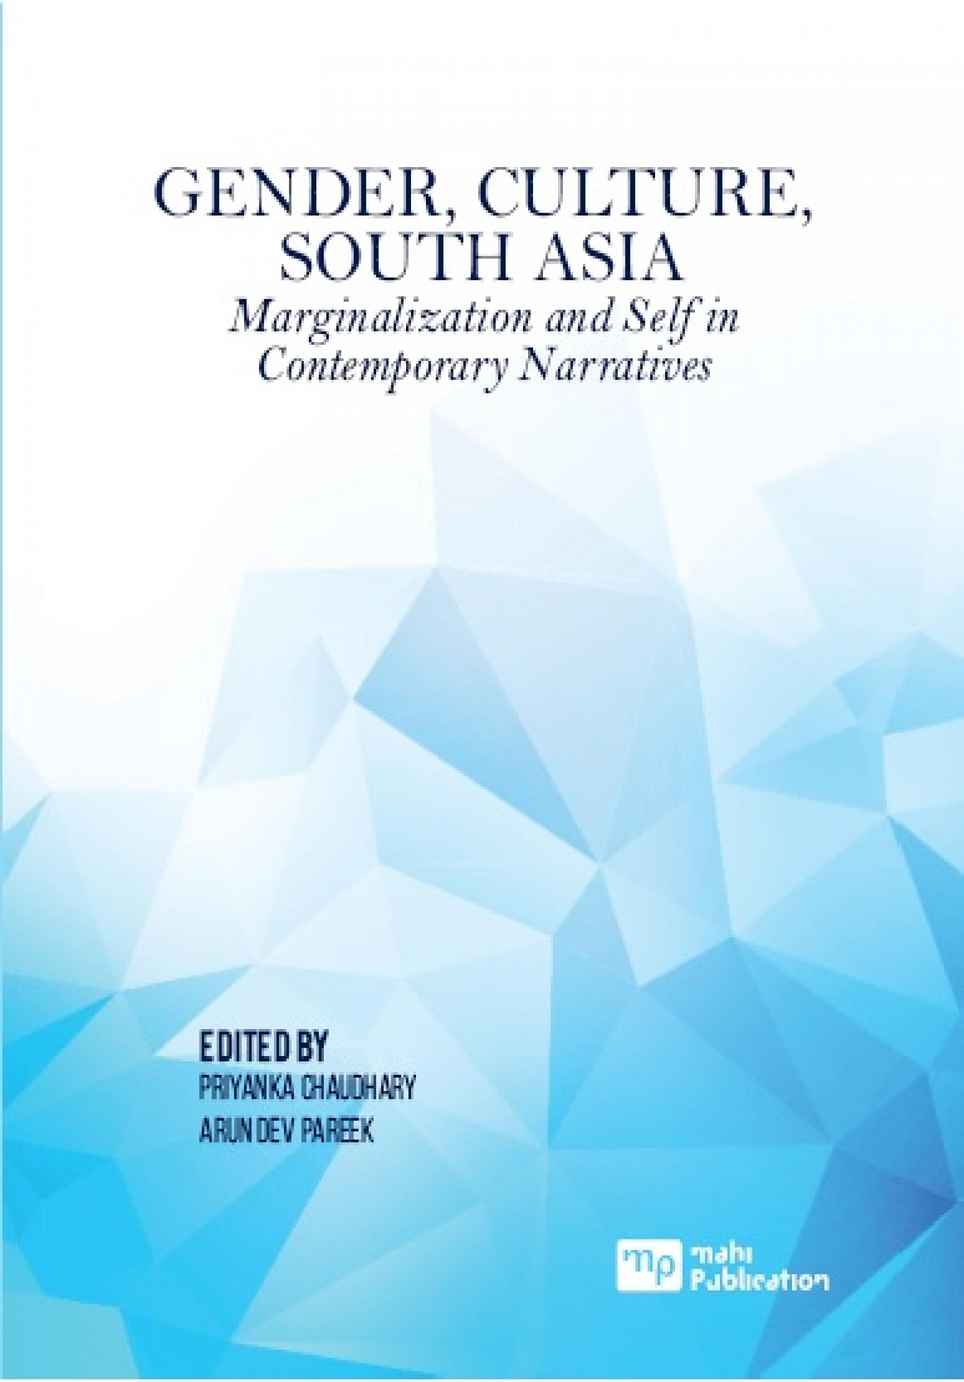 Gender, Culture, South Asia Marginalization and Self in Contemporary Narratives